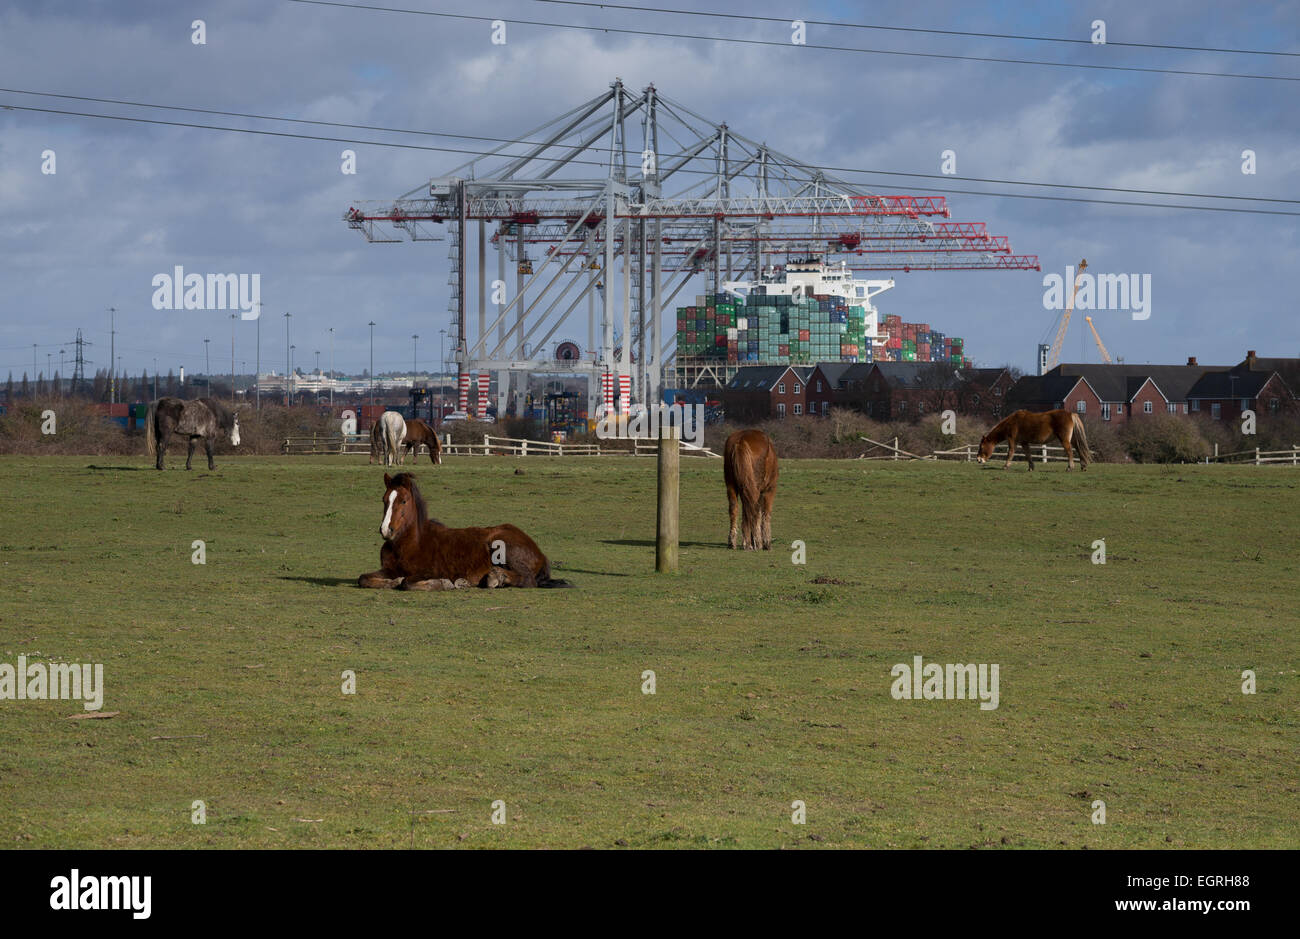 Cork's farm, in Marchwood, Southampton, where an energy from food waste plant is proposed. Stock Photo